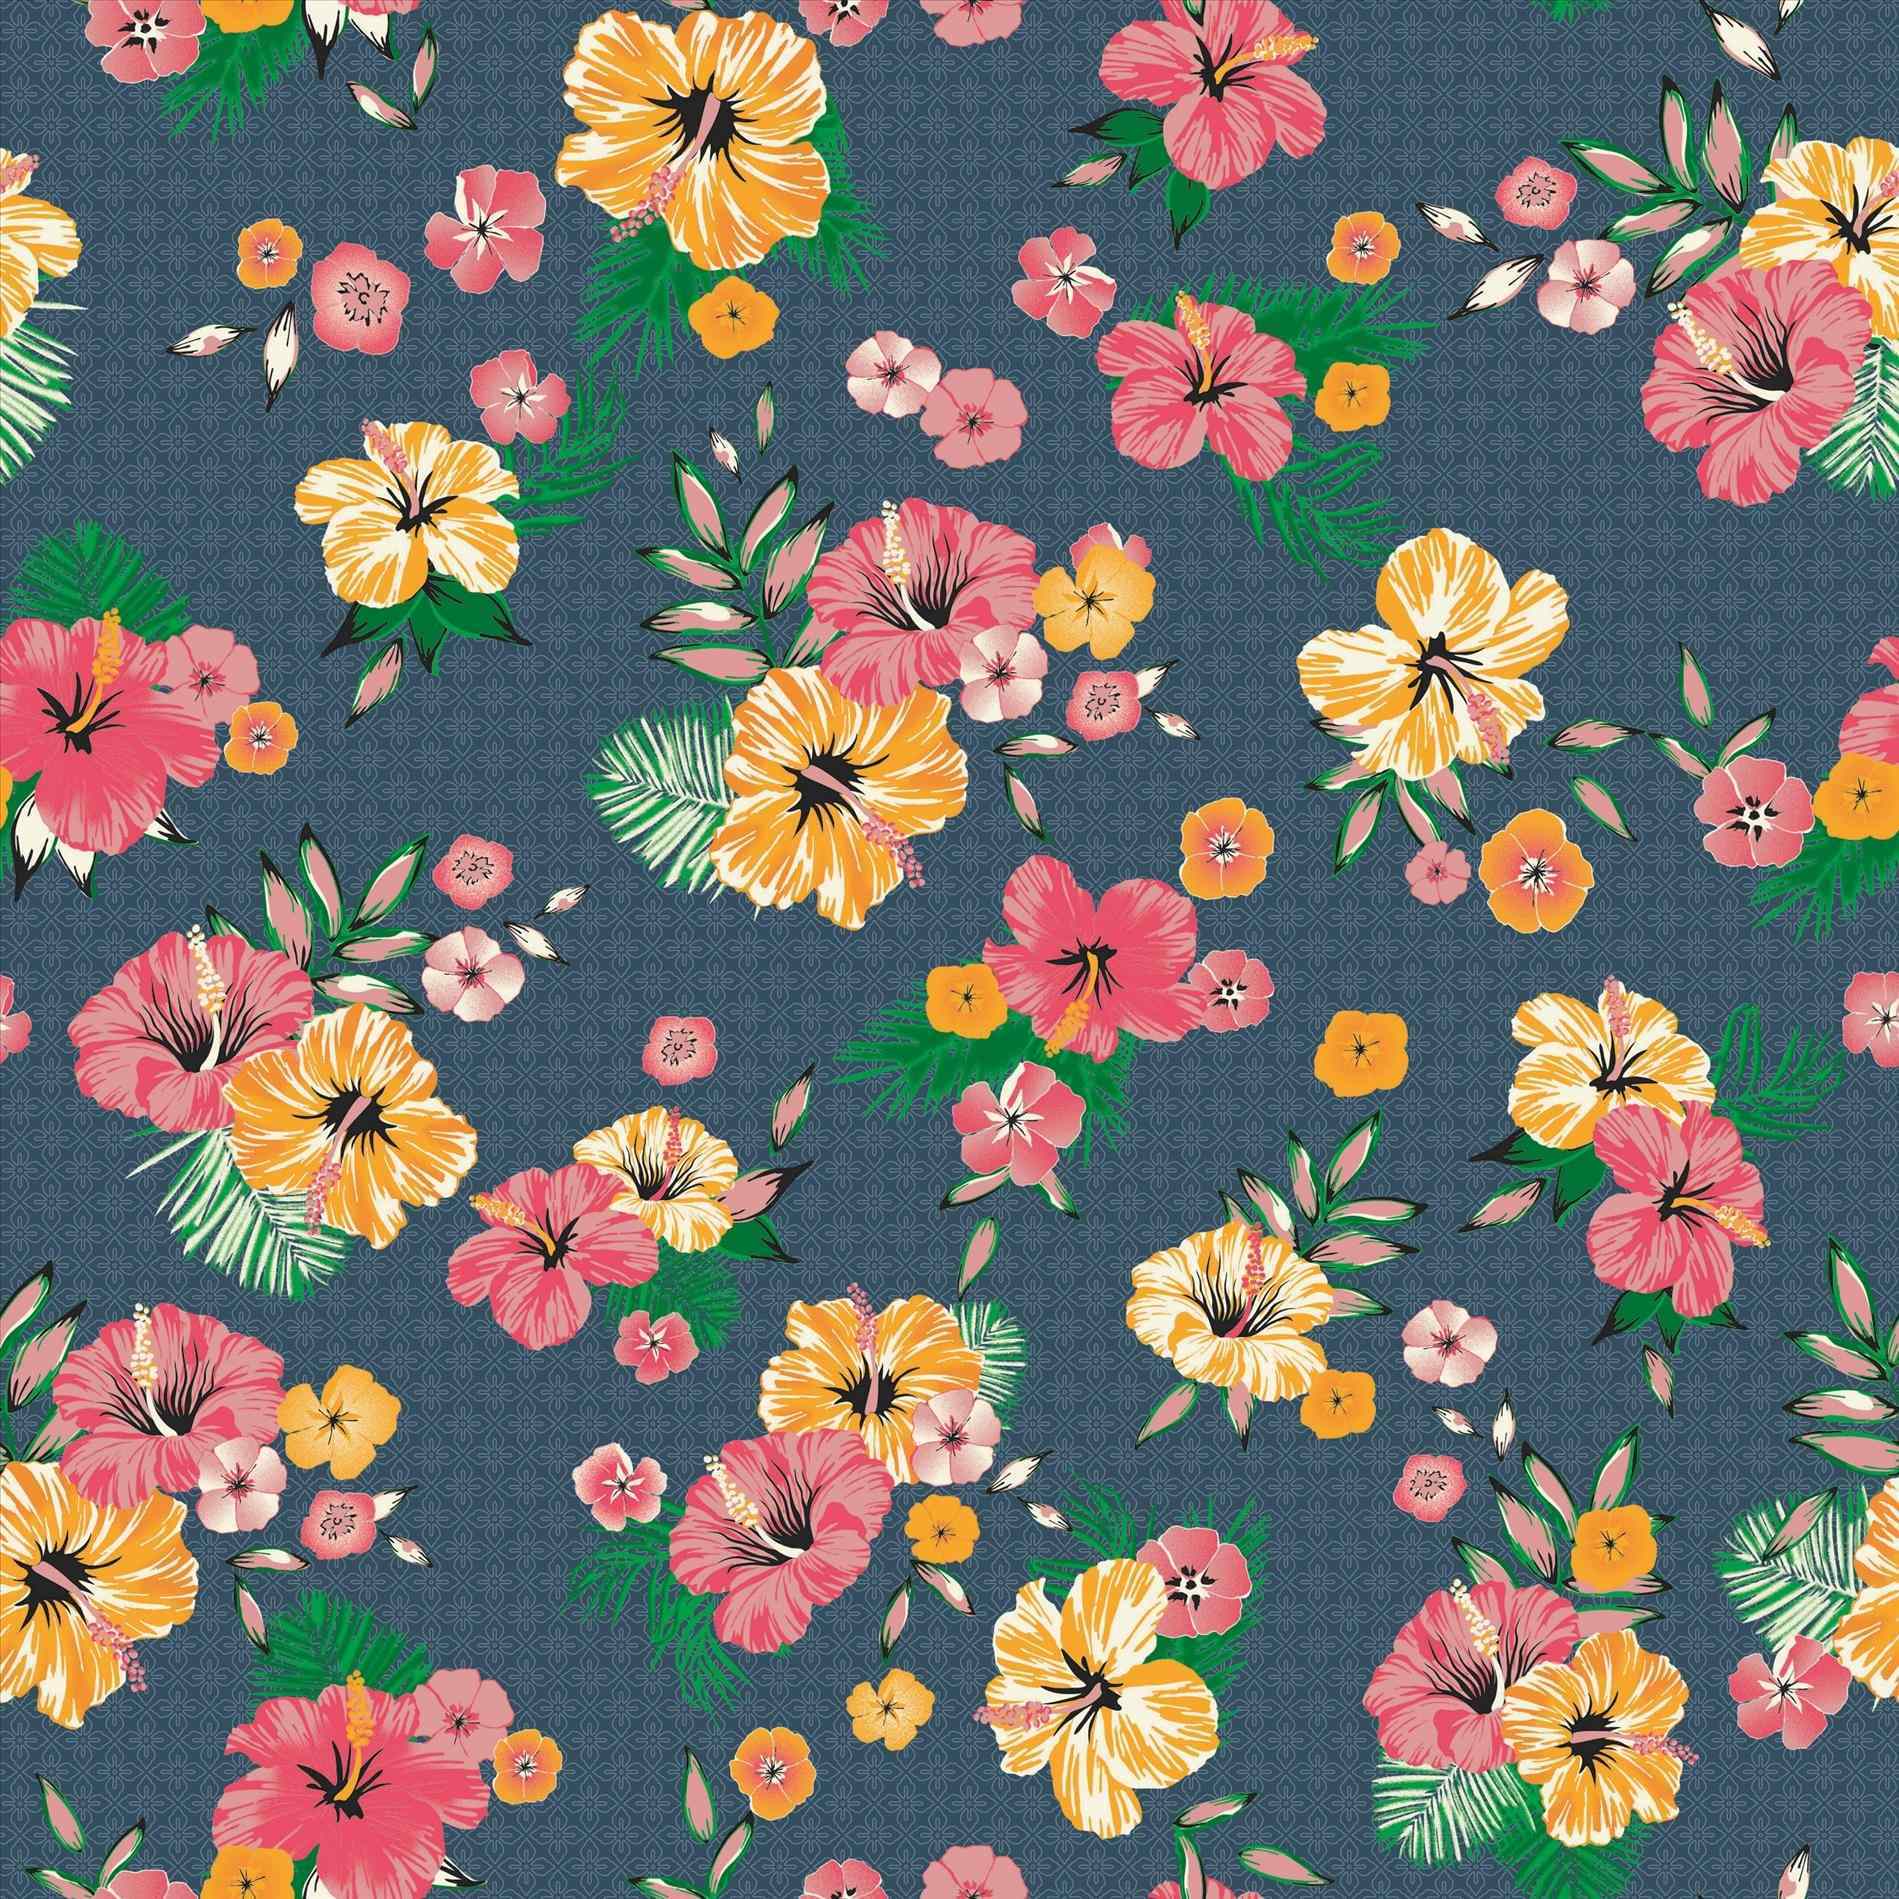 Flowers Backgrounds Tumblr Patterns For Spring Floral And Wallpapers